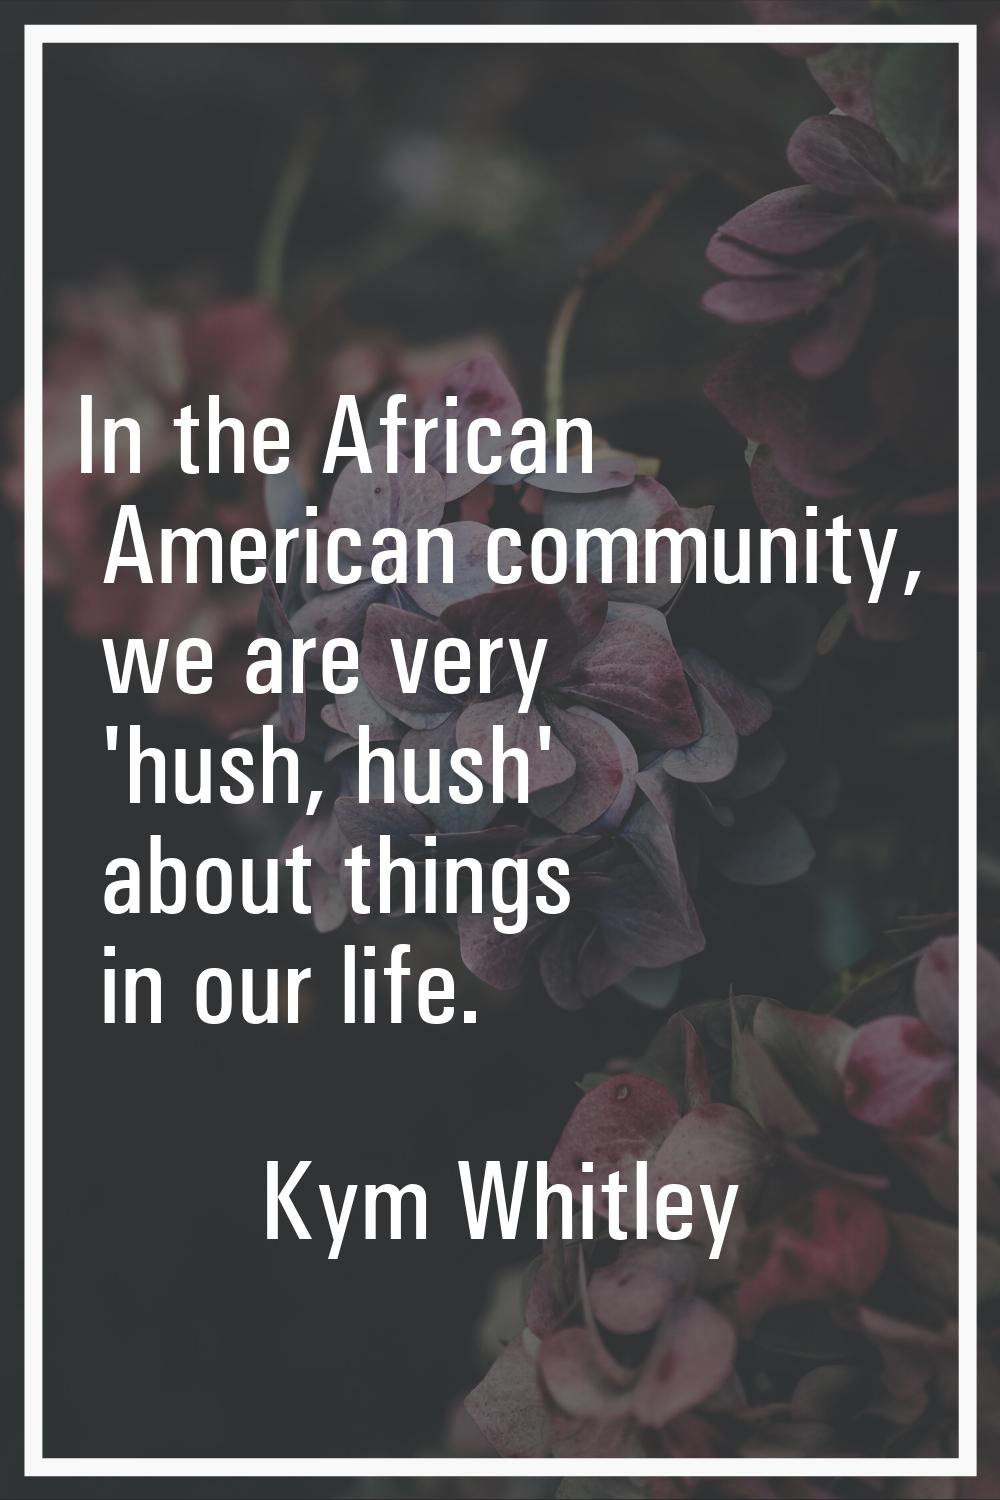 In the African American community, we are very 'hush, hush' about things in our life.